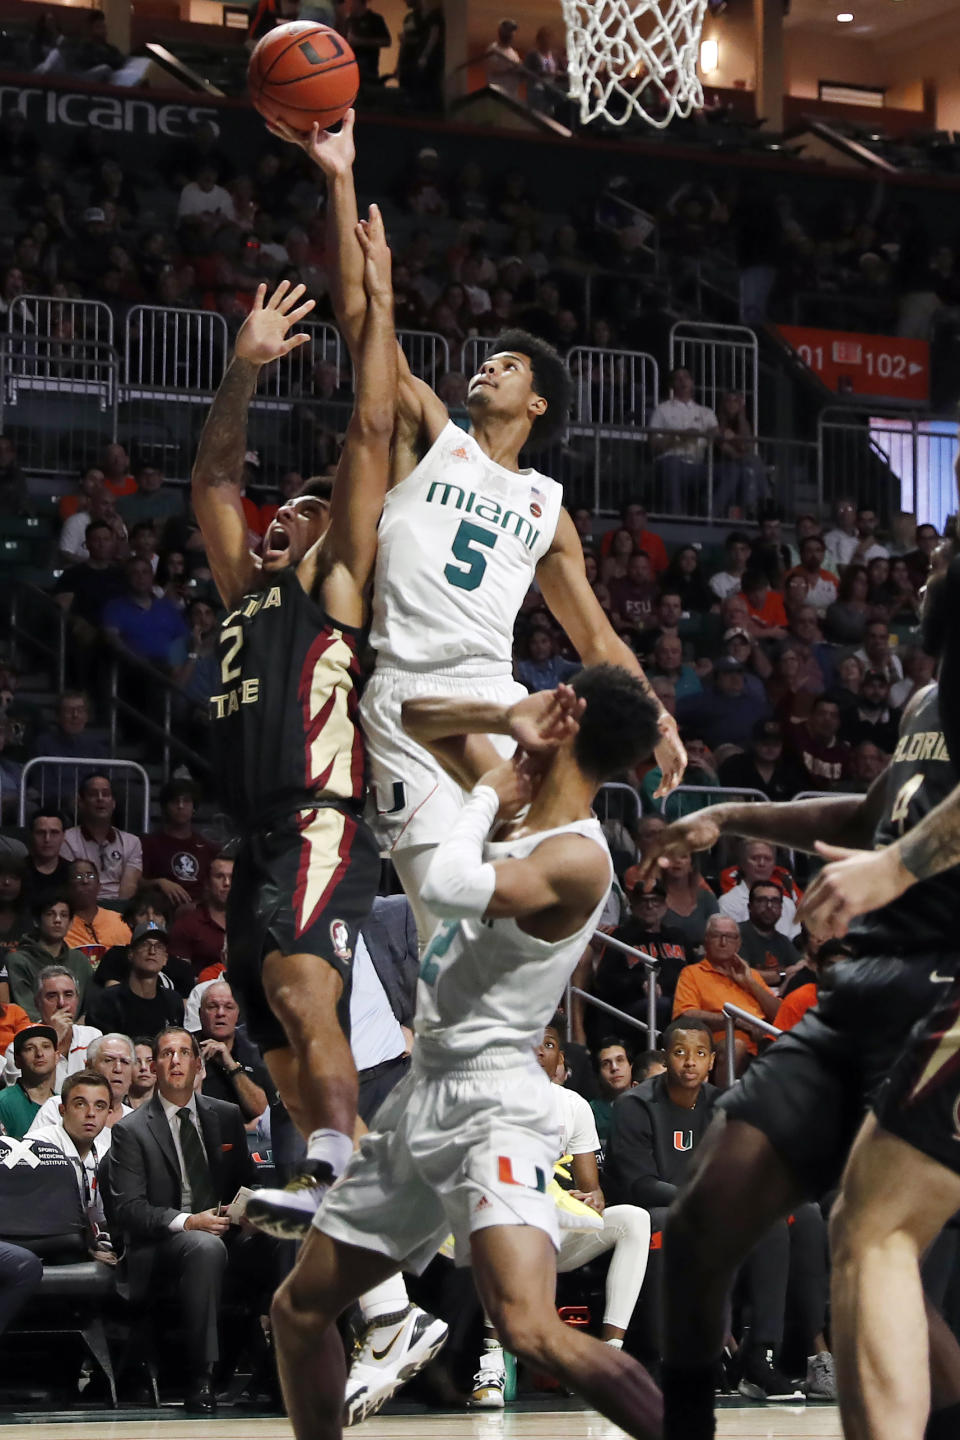 Miami guard Harlond Beverly (5) rebounds the ball against Florida State guard Anthony Polite (2) during the first half of an NCAA college basketball game on Saturday, Jan. 18, 2020, in Coral Gables, Fla. (AP Photo/Brynn Anderson)